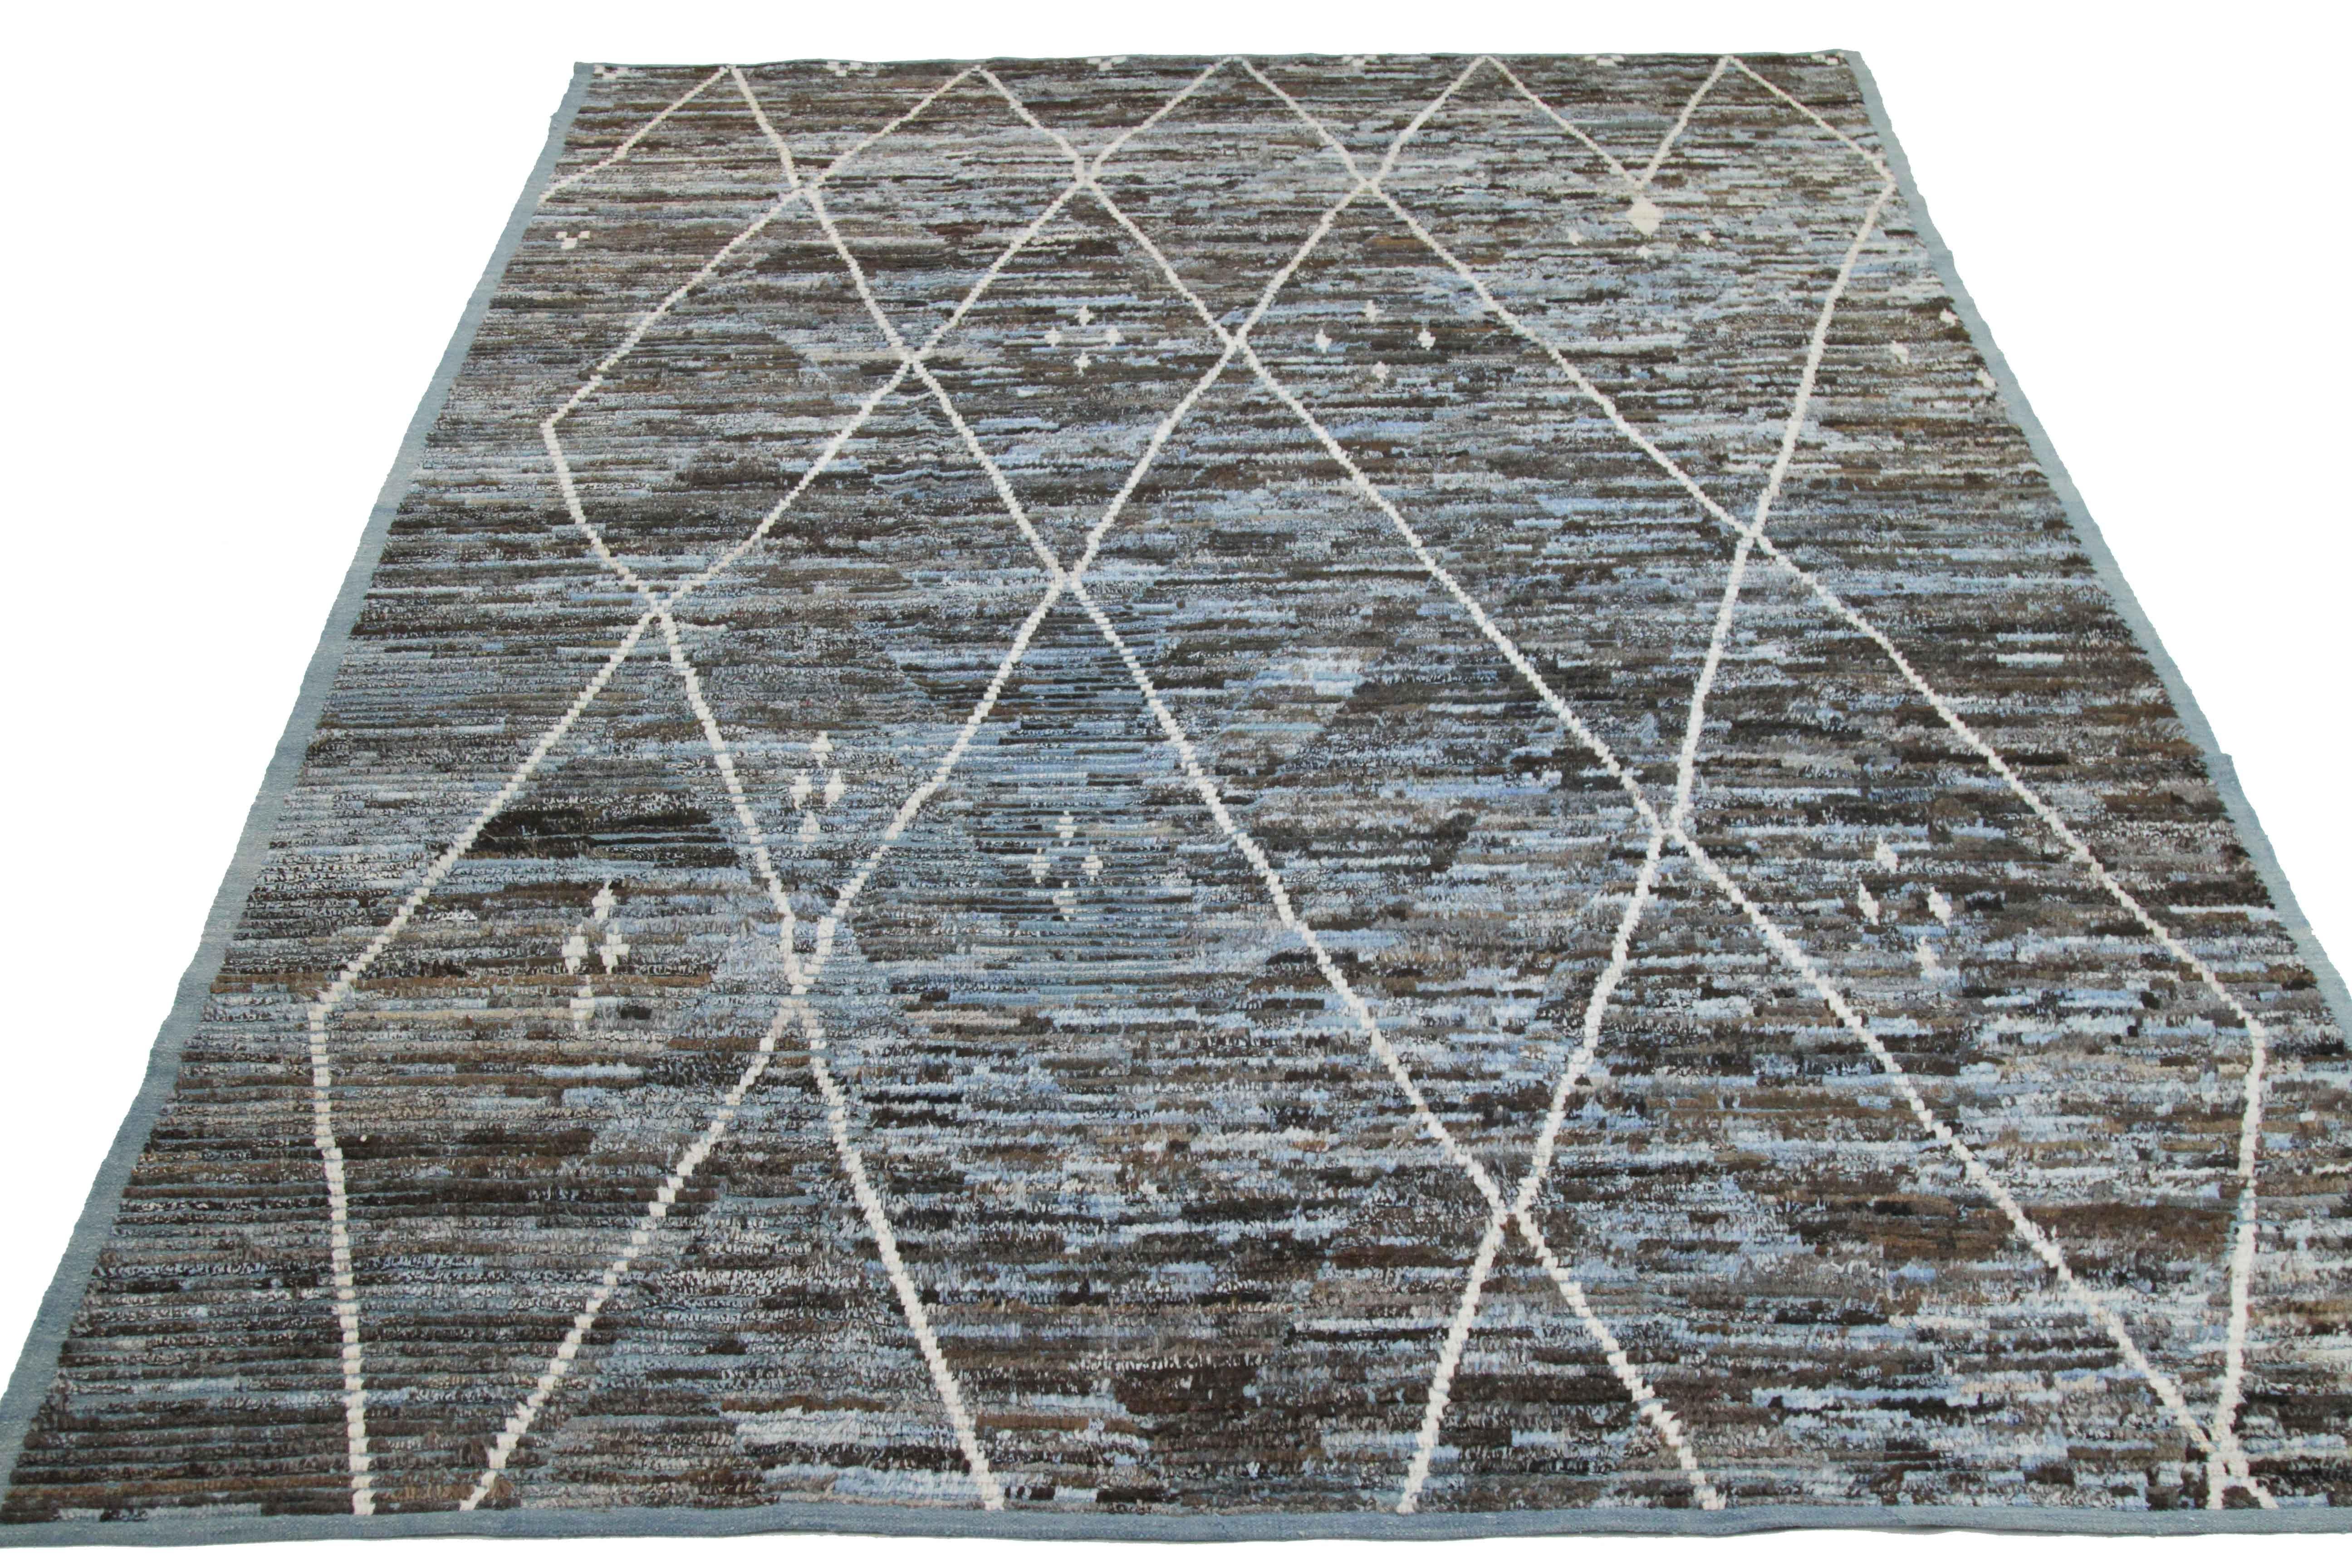 Modern Afghan rug handwoven from the finest sheep’s wool and colored with all-natural vegetable dyes that are safe for humans and pets. It’s a traditional Afghan weaving featuring a Moroccan inspired design highlighted by white lines over a mix of